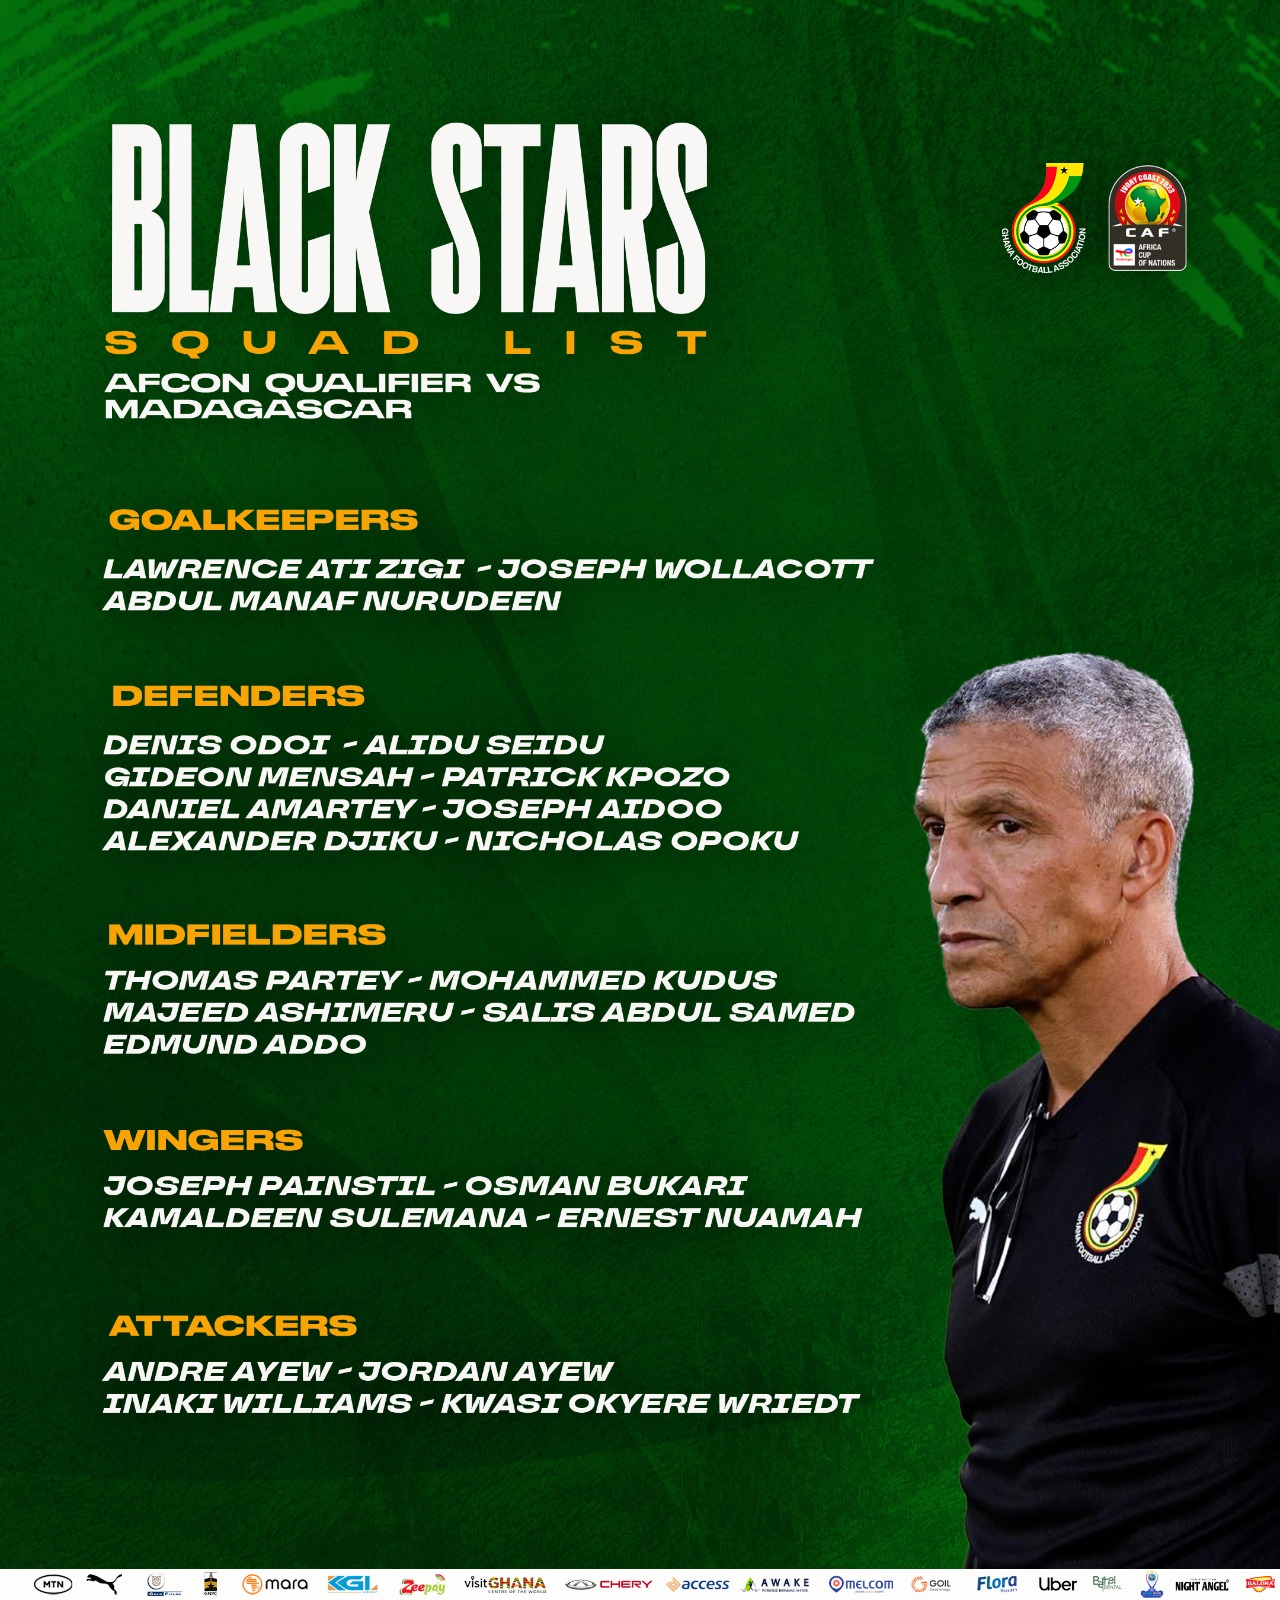 Black Stars squad for upcoming Madagascar game have been named.